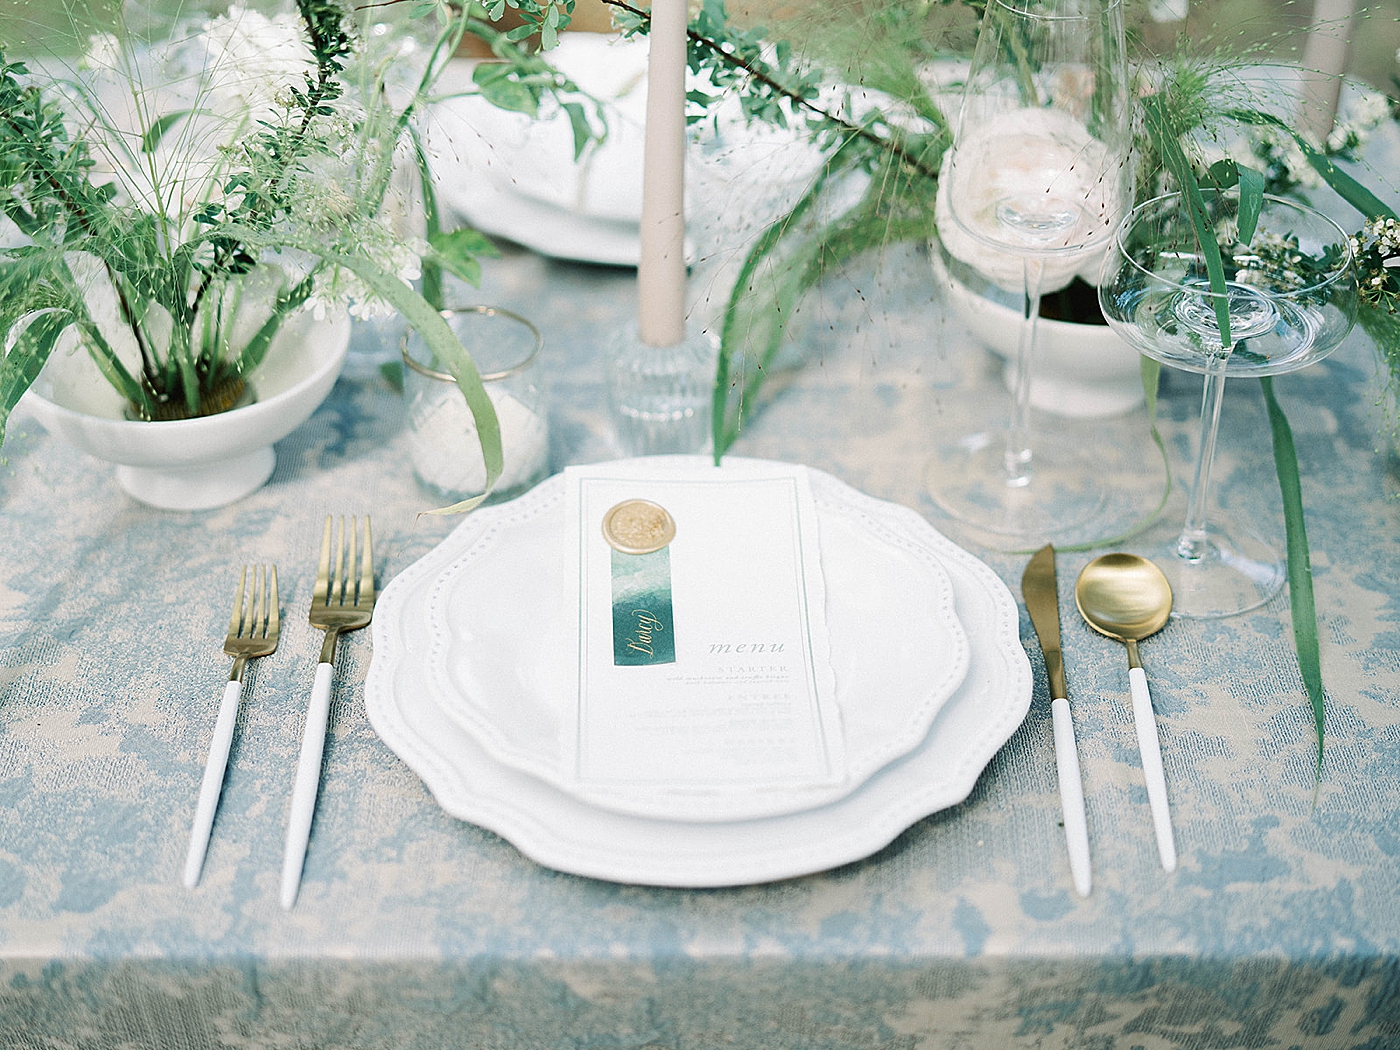 Table setting with gold and white flatware | Charleston Photography Workshop with Carters Event Co